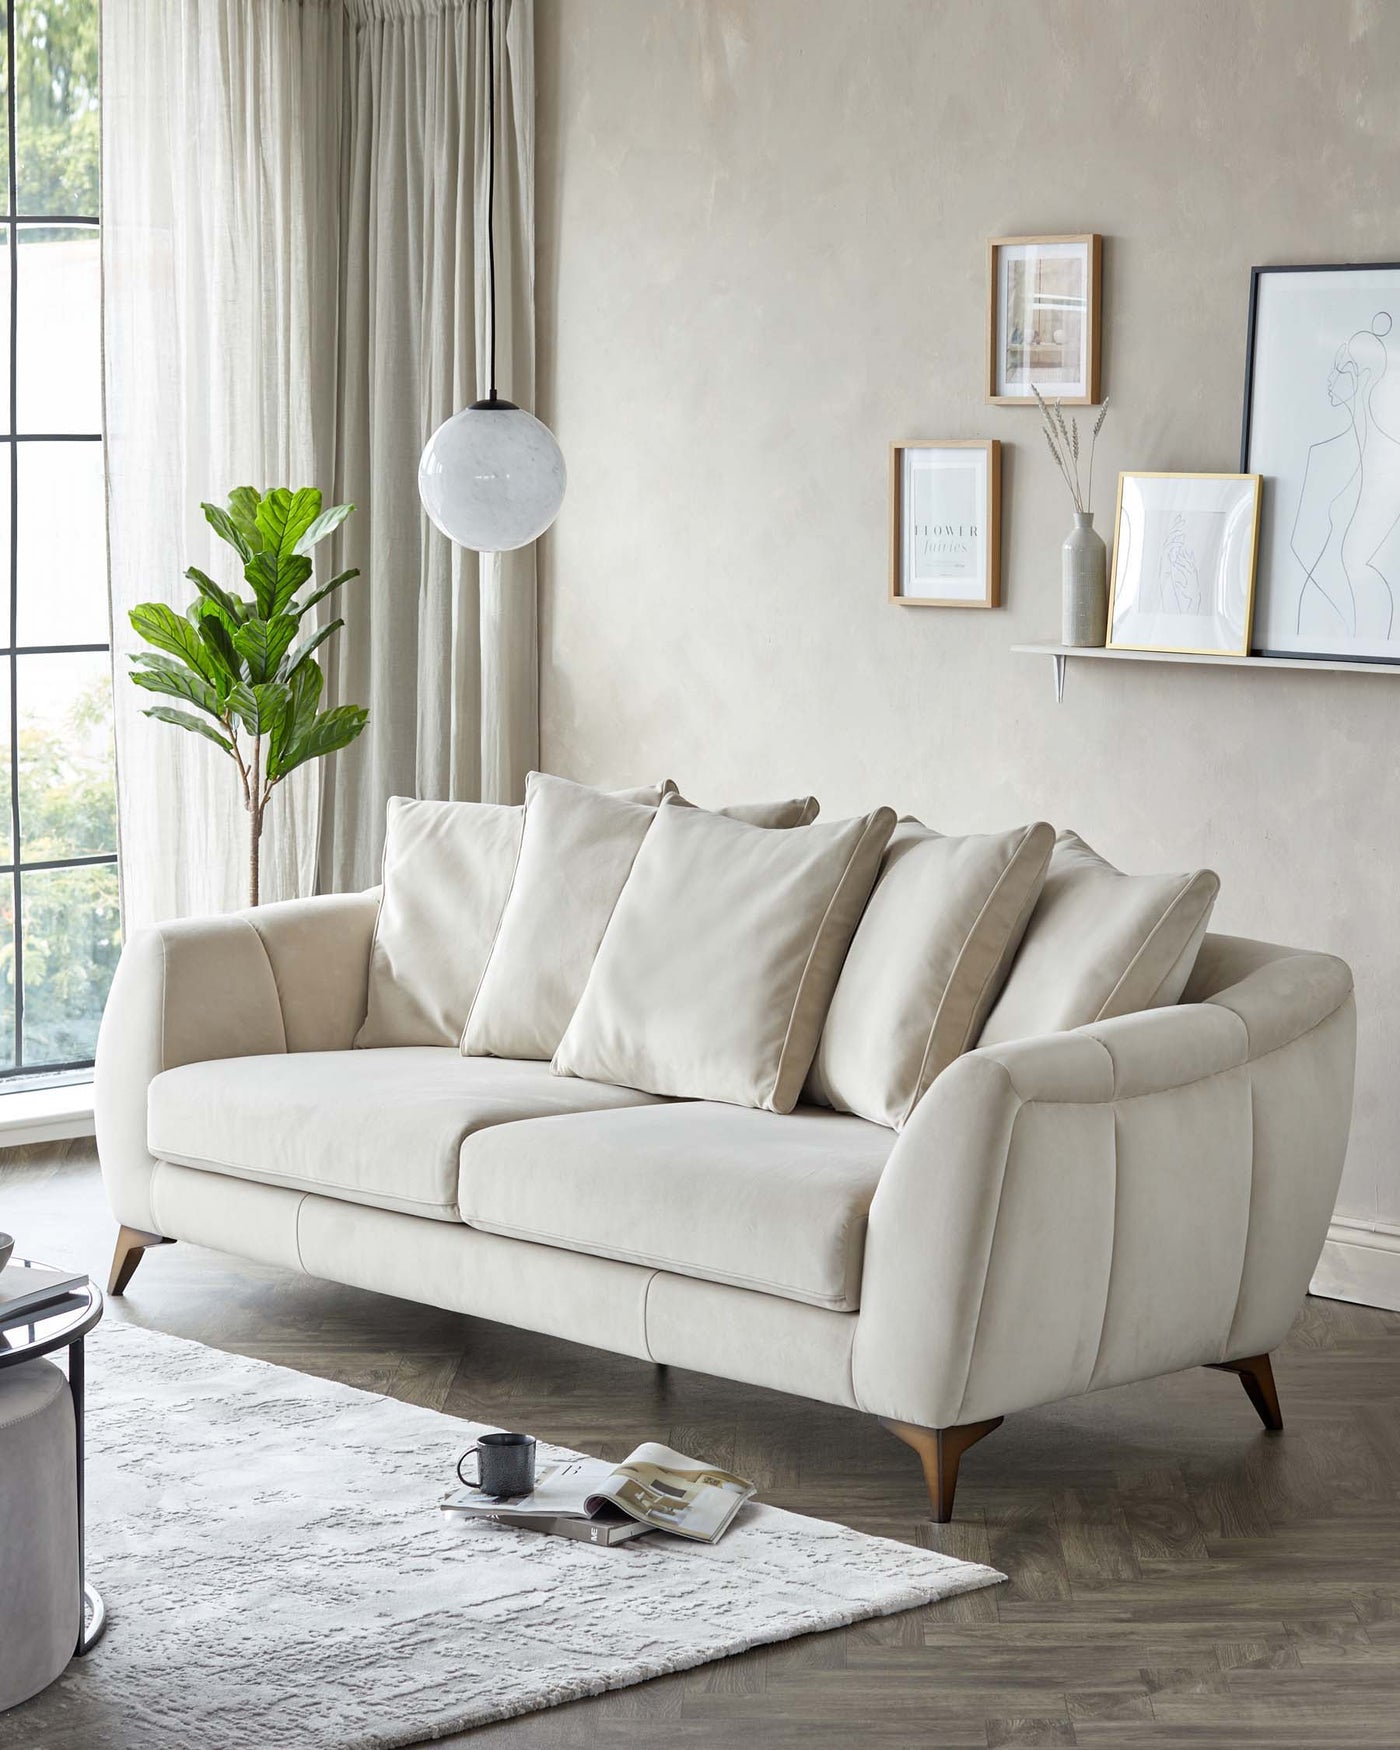 Elegant contemporary three-seater sofa with plush cream upholstery and angled wooden legs, accompanied by a small round black side table with a chrome base. A light grey textured area rug lies beneath the sofa, enhancing the modern aesthetic of the setting.